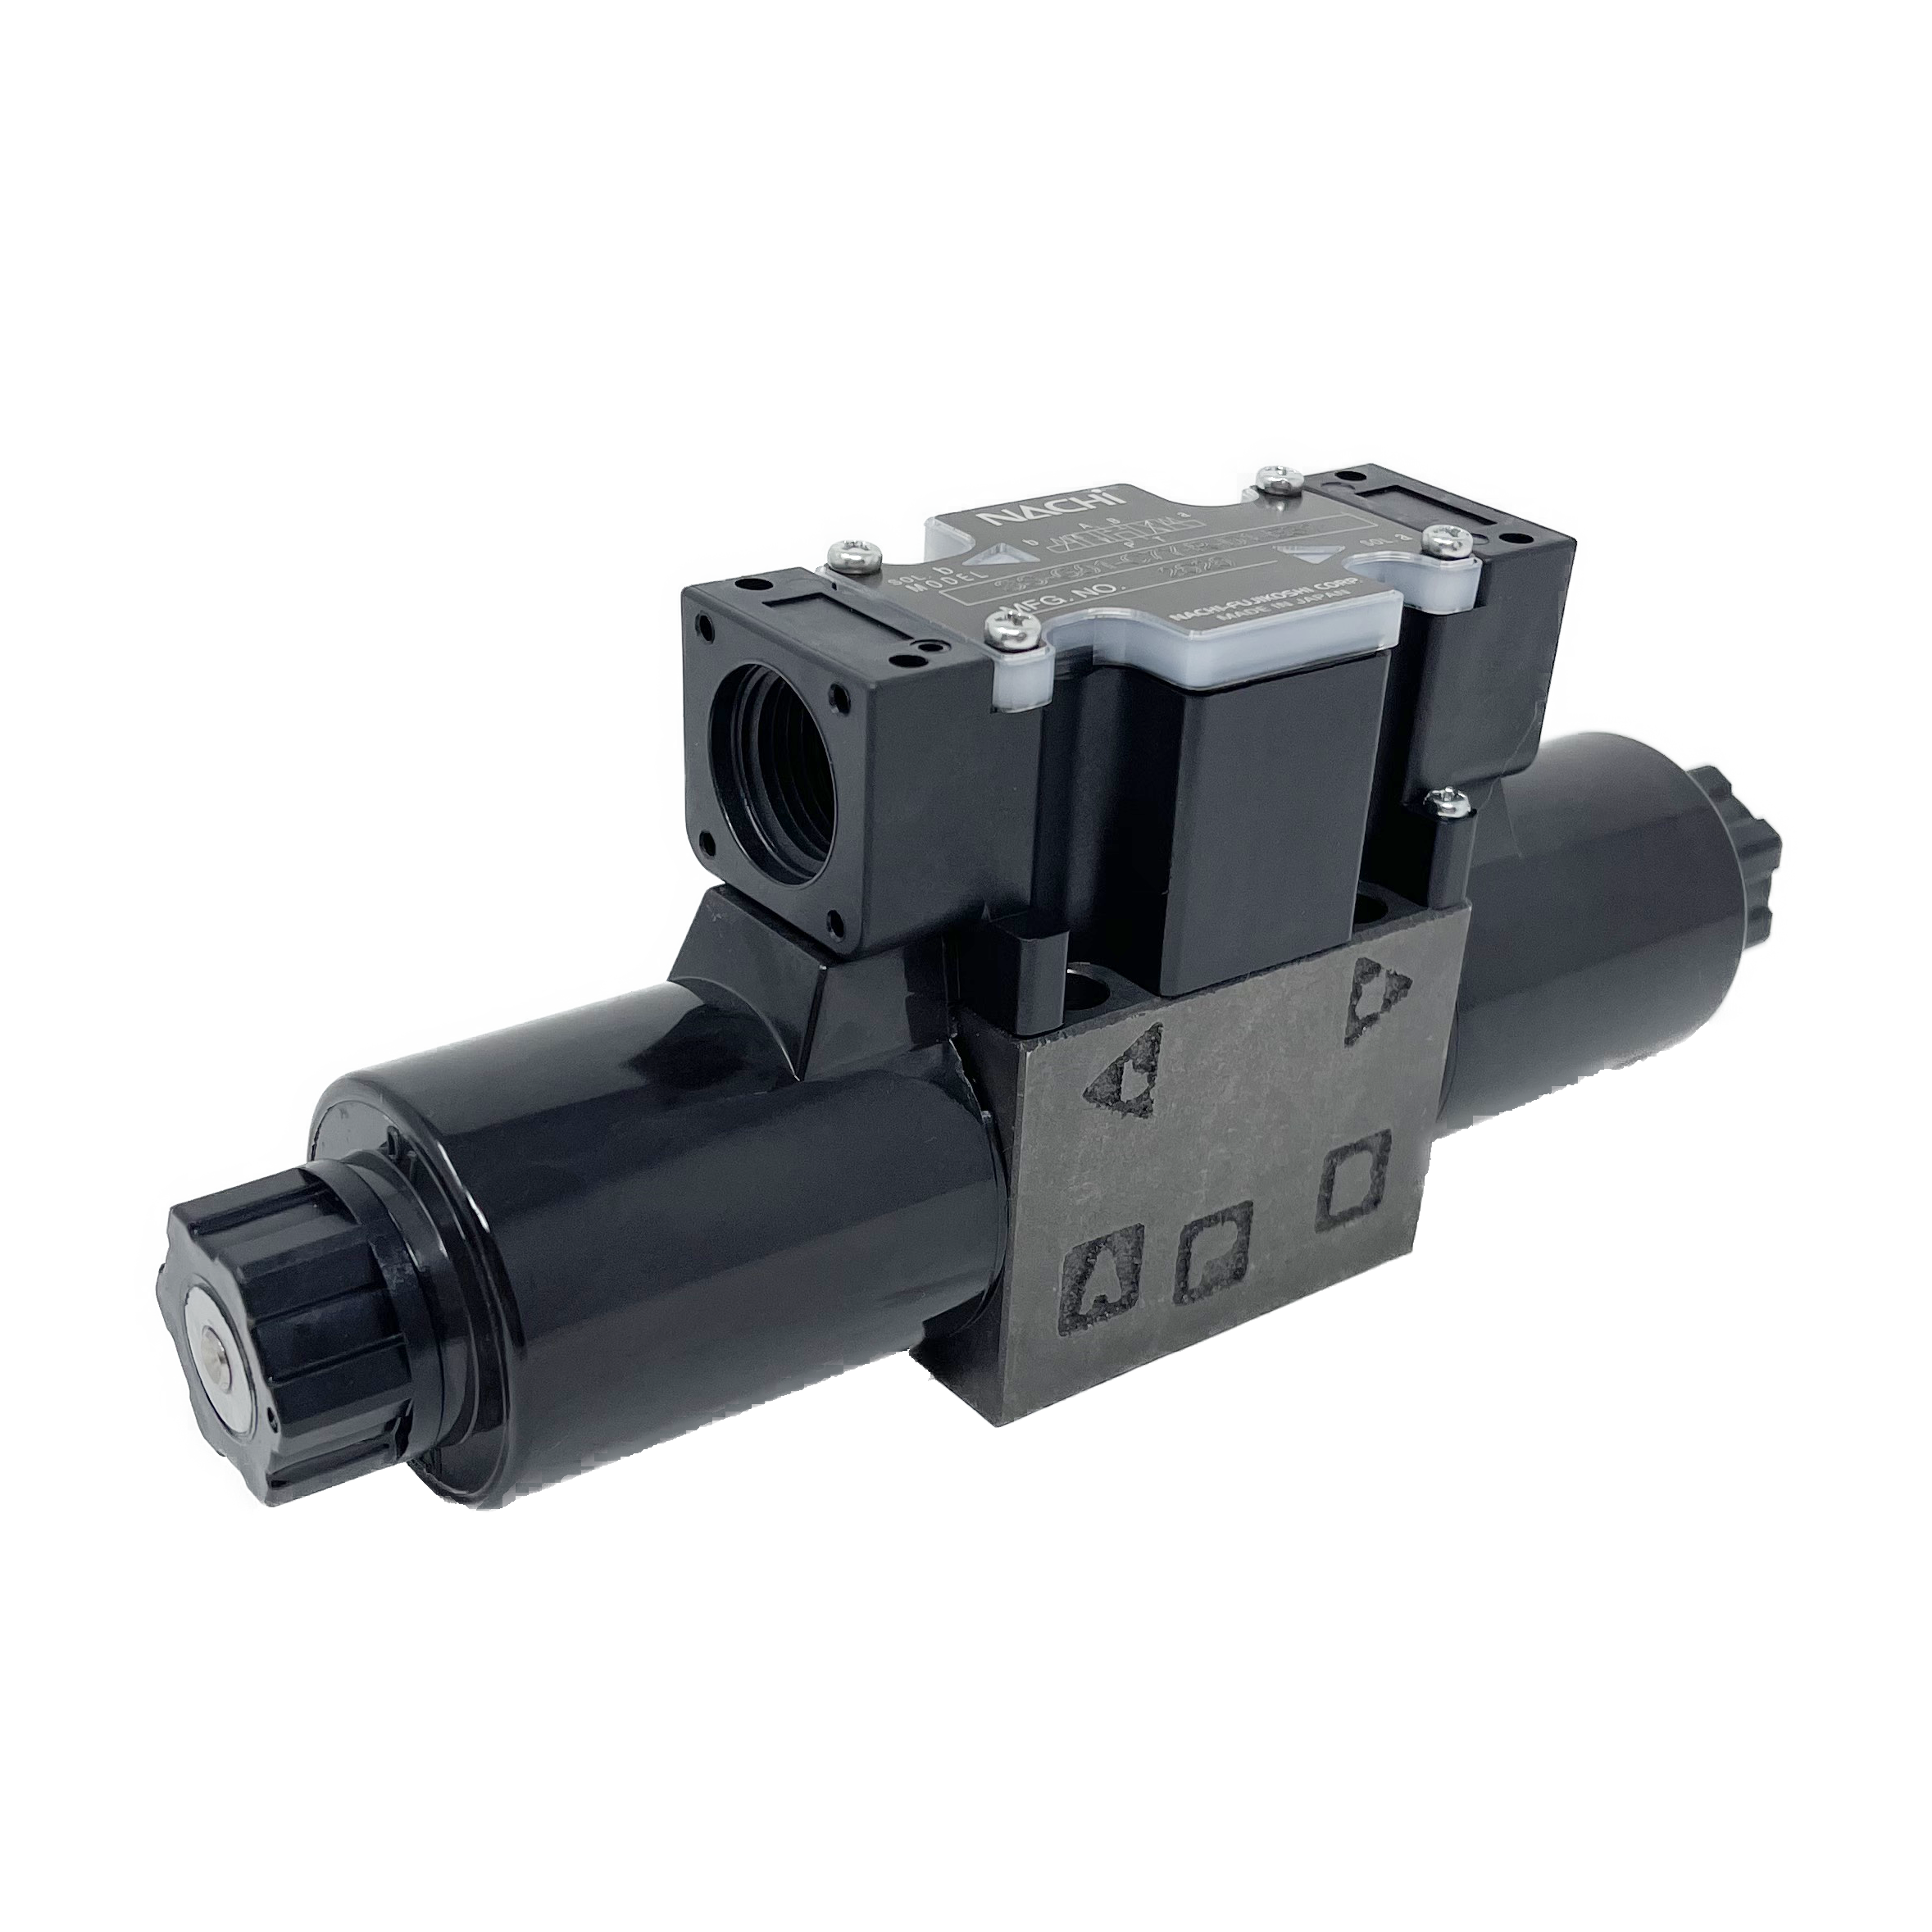 SS-G01-C6-R-E115-E31 : Nachi Solenoid Valve, 3P4W, D03 (NG6), 17.1GPM, 5075psi, Motor Spool, 115 VAC, Wiring Box with Lights, with Built-in Rectifier